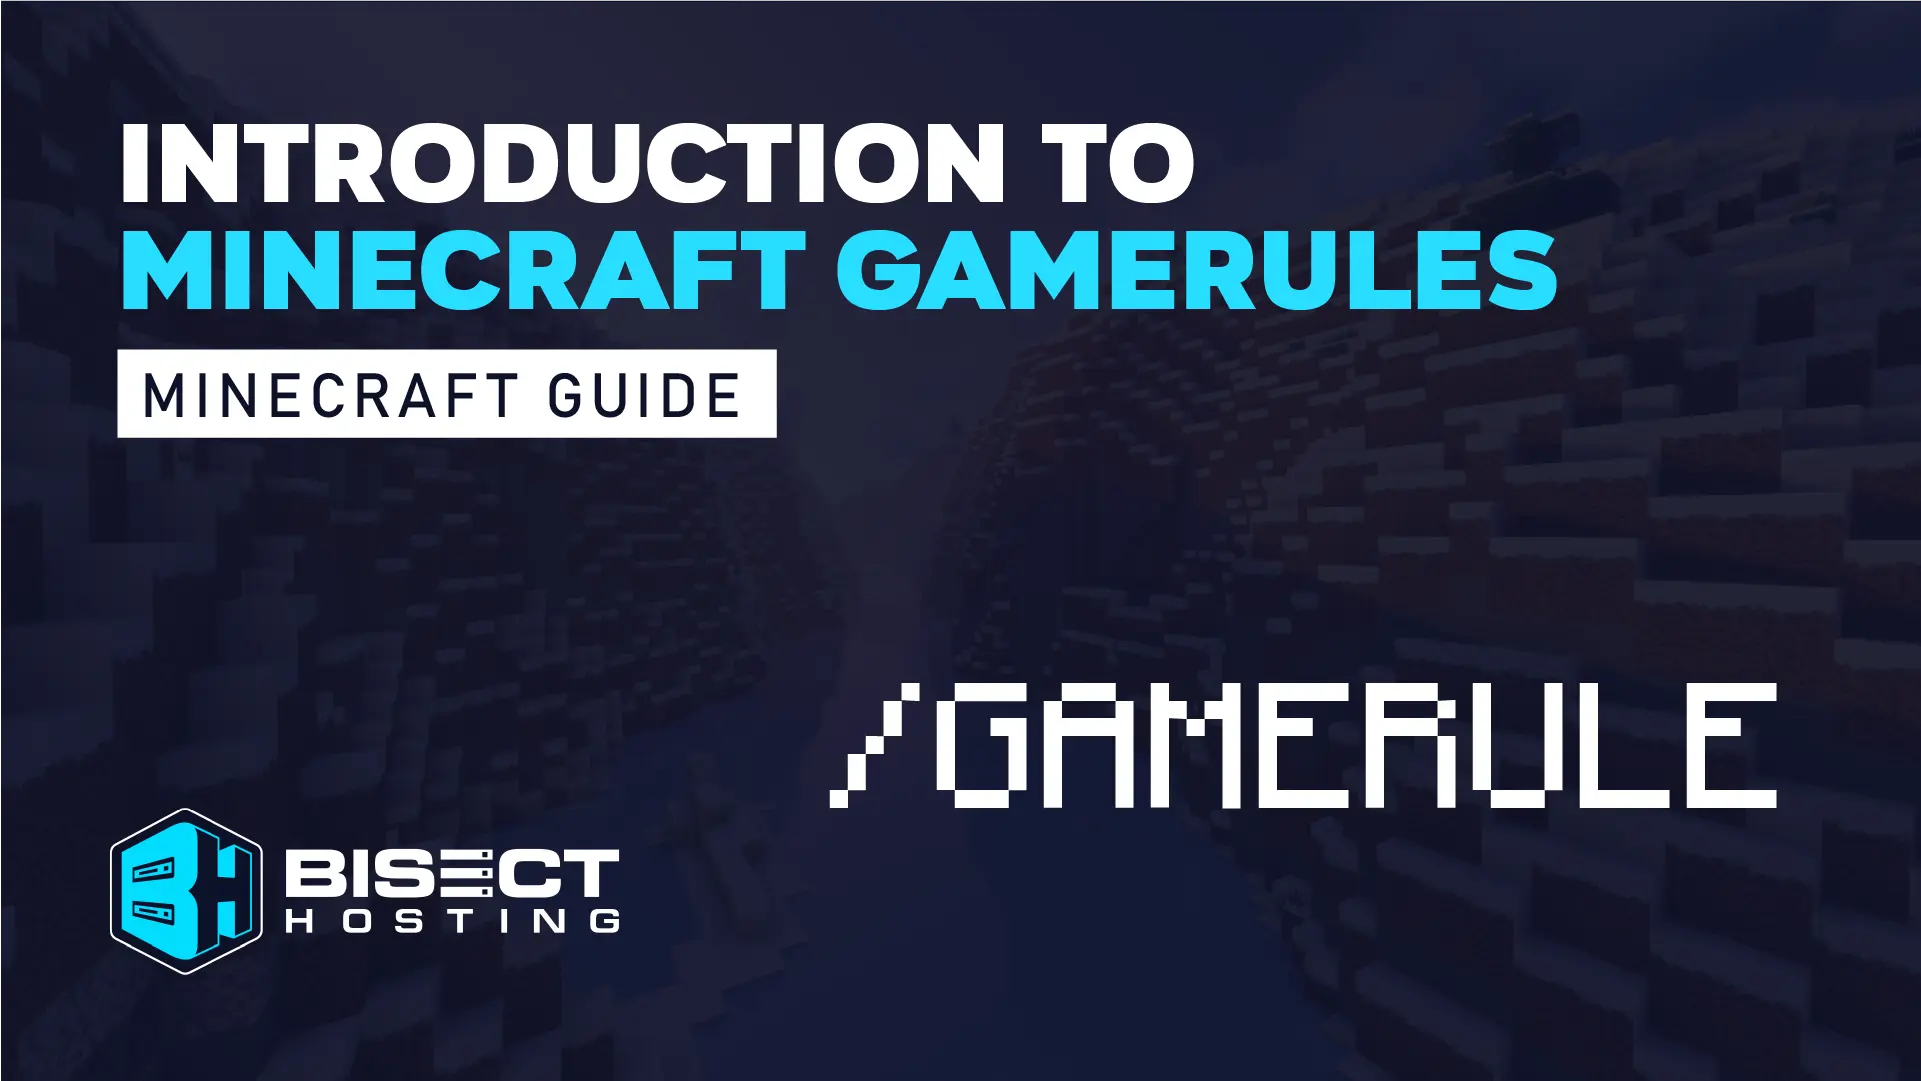 All Minecraft Gamerules & How to Use Them